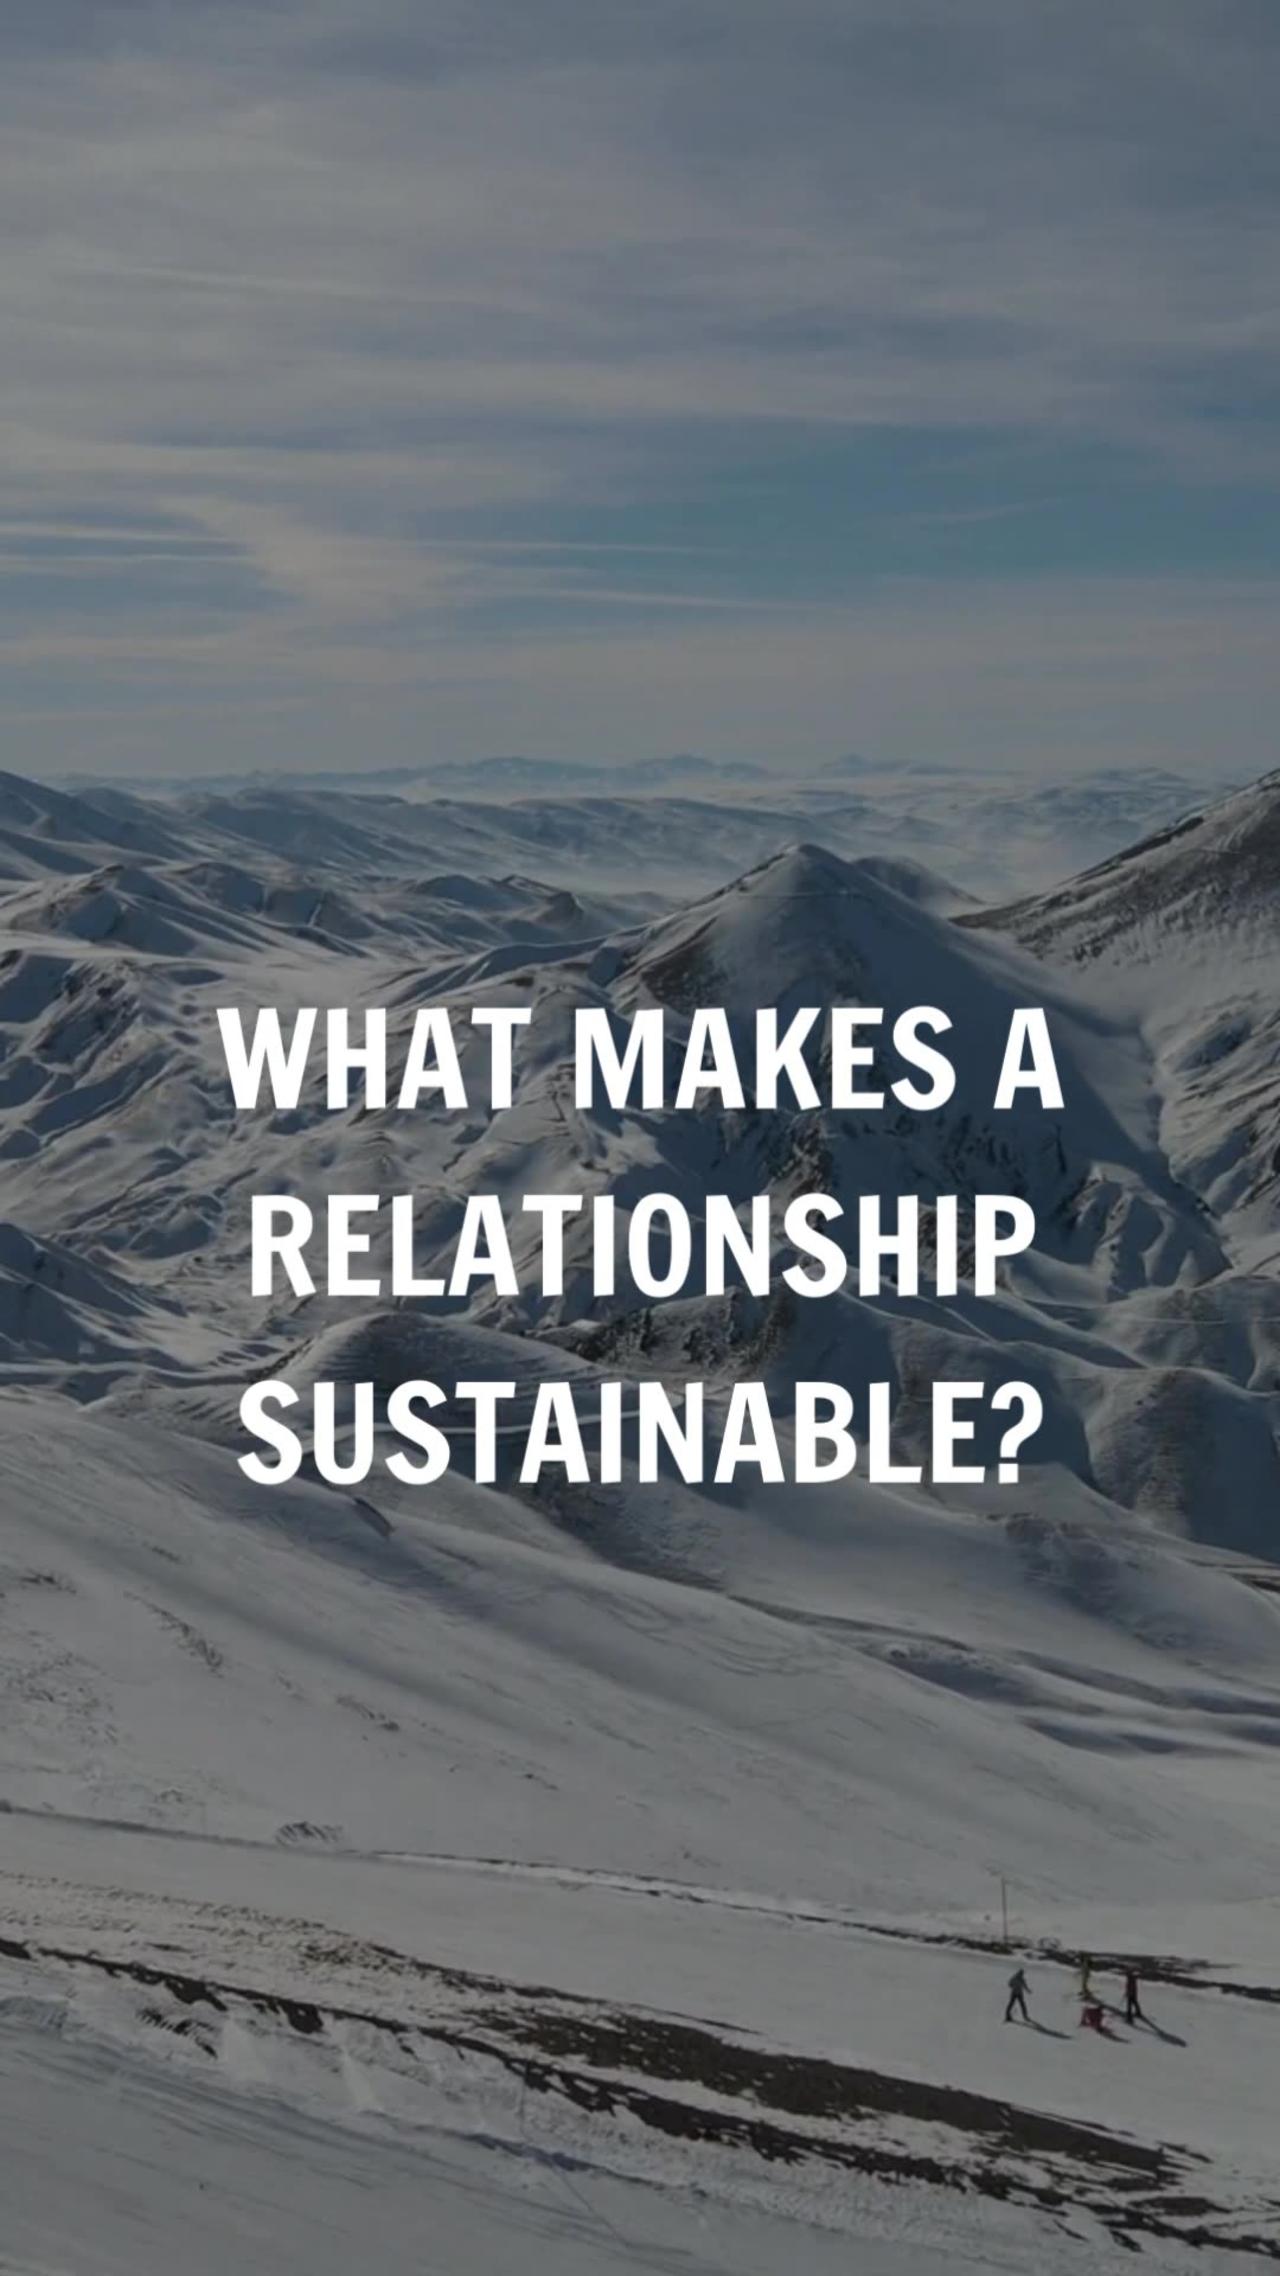 What makes a relationship sustainable?